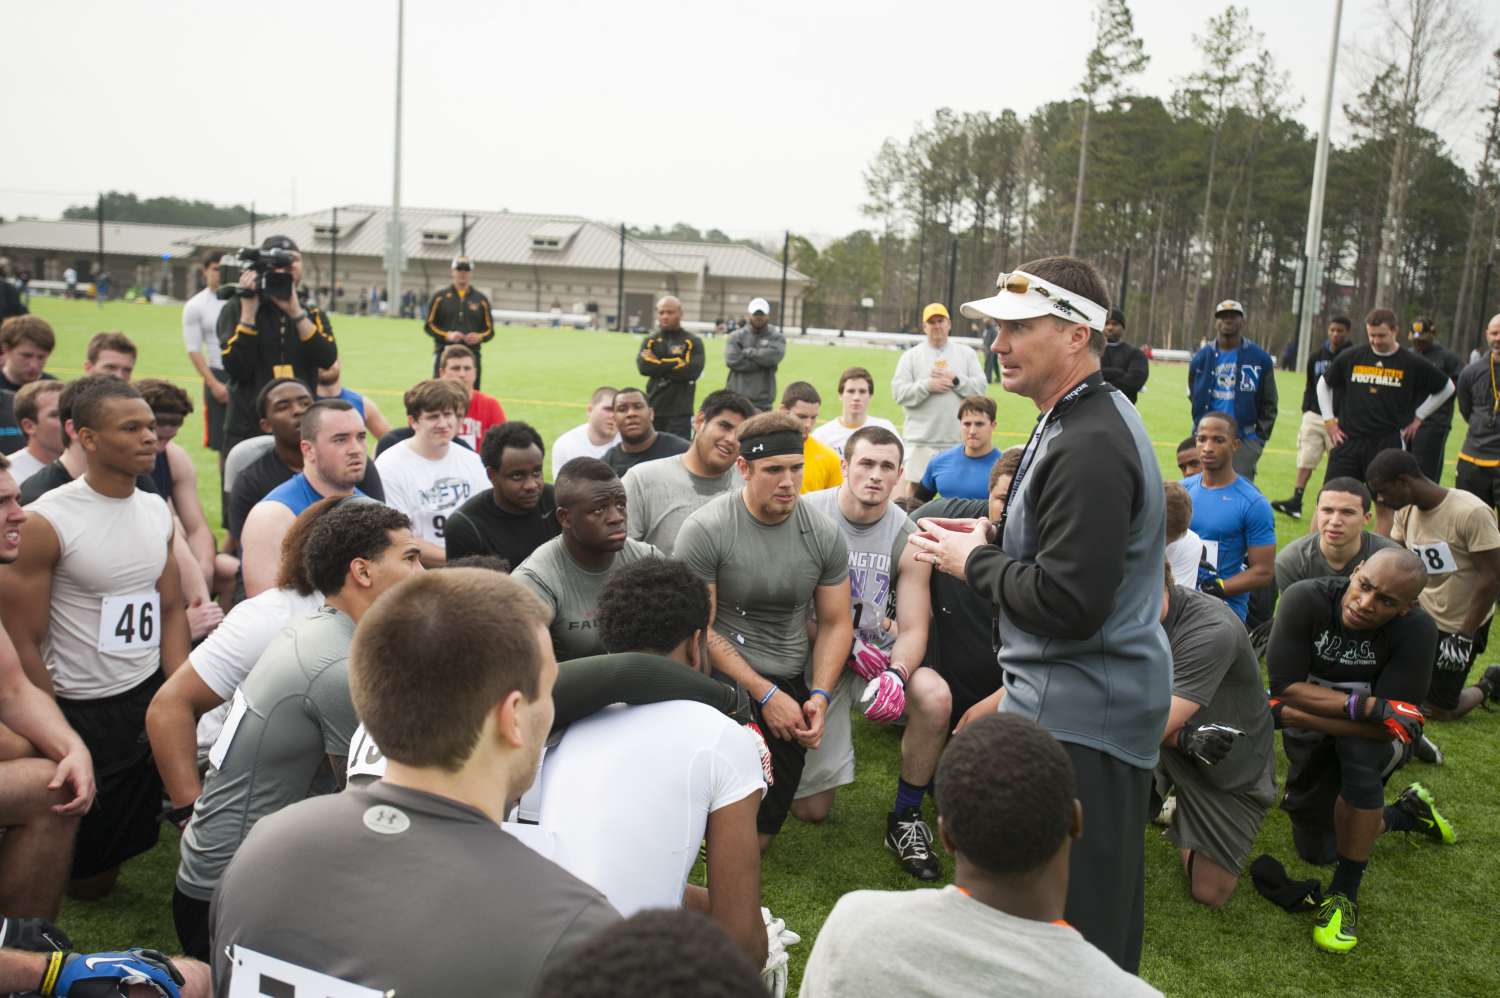 85 participate in KSU’s first-ever football tryout